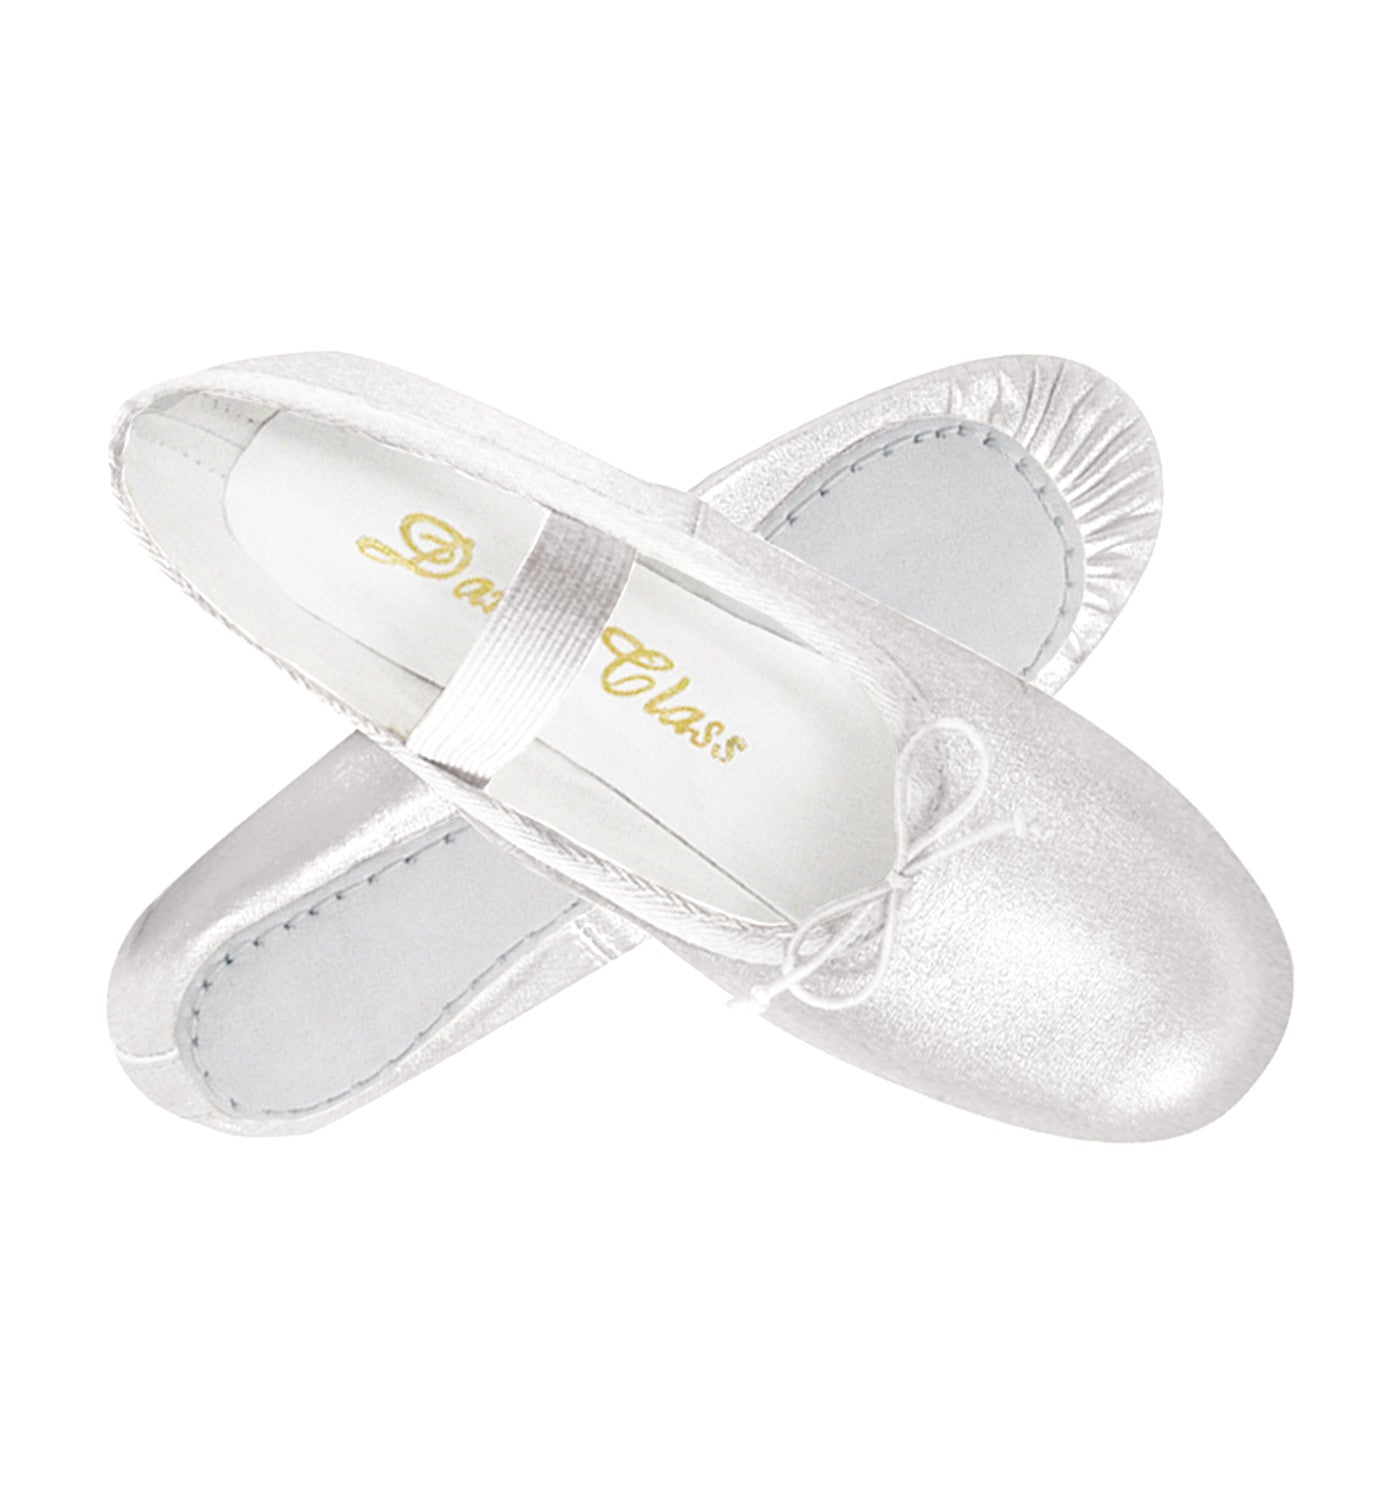 Adult Gold/Silver Leather Full Sole Ballet Slippers for Women